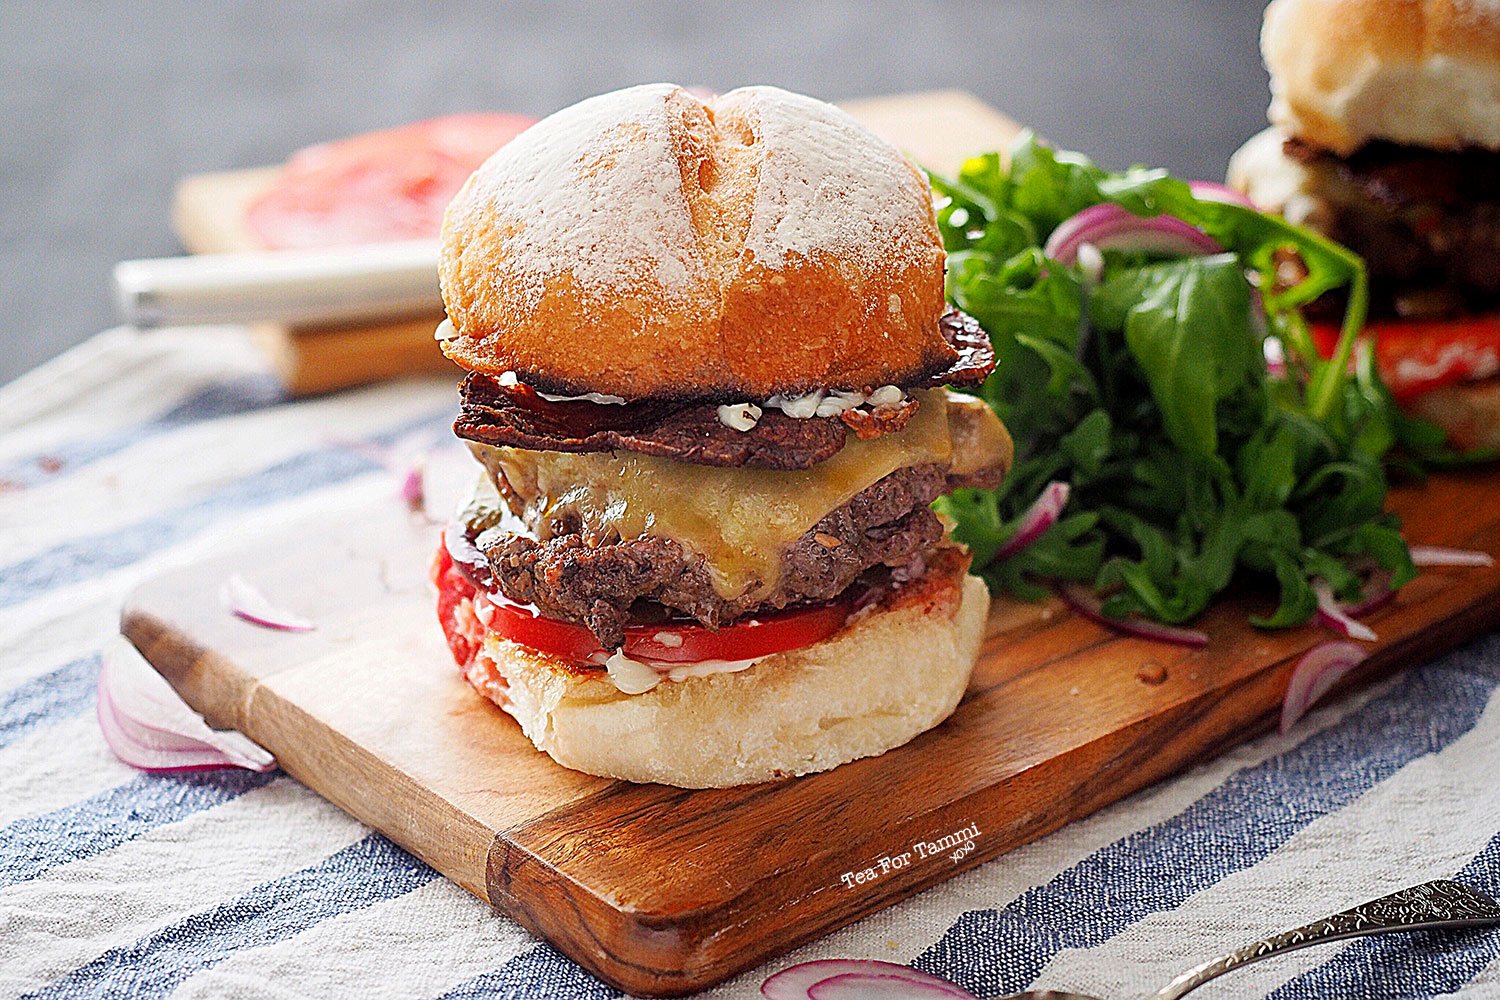 Kangaroo Burger Recipe, with Beetroot, Fresh Tomatoes, Pickles and Cheese! And Bacon, of course.